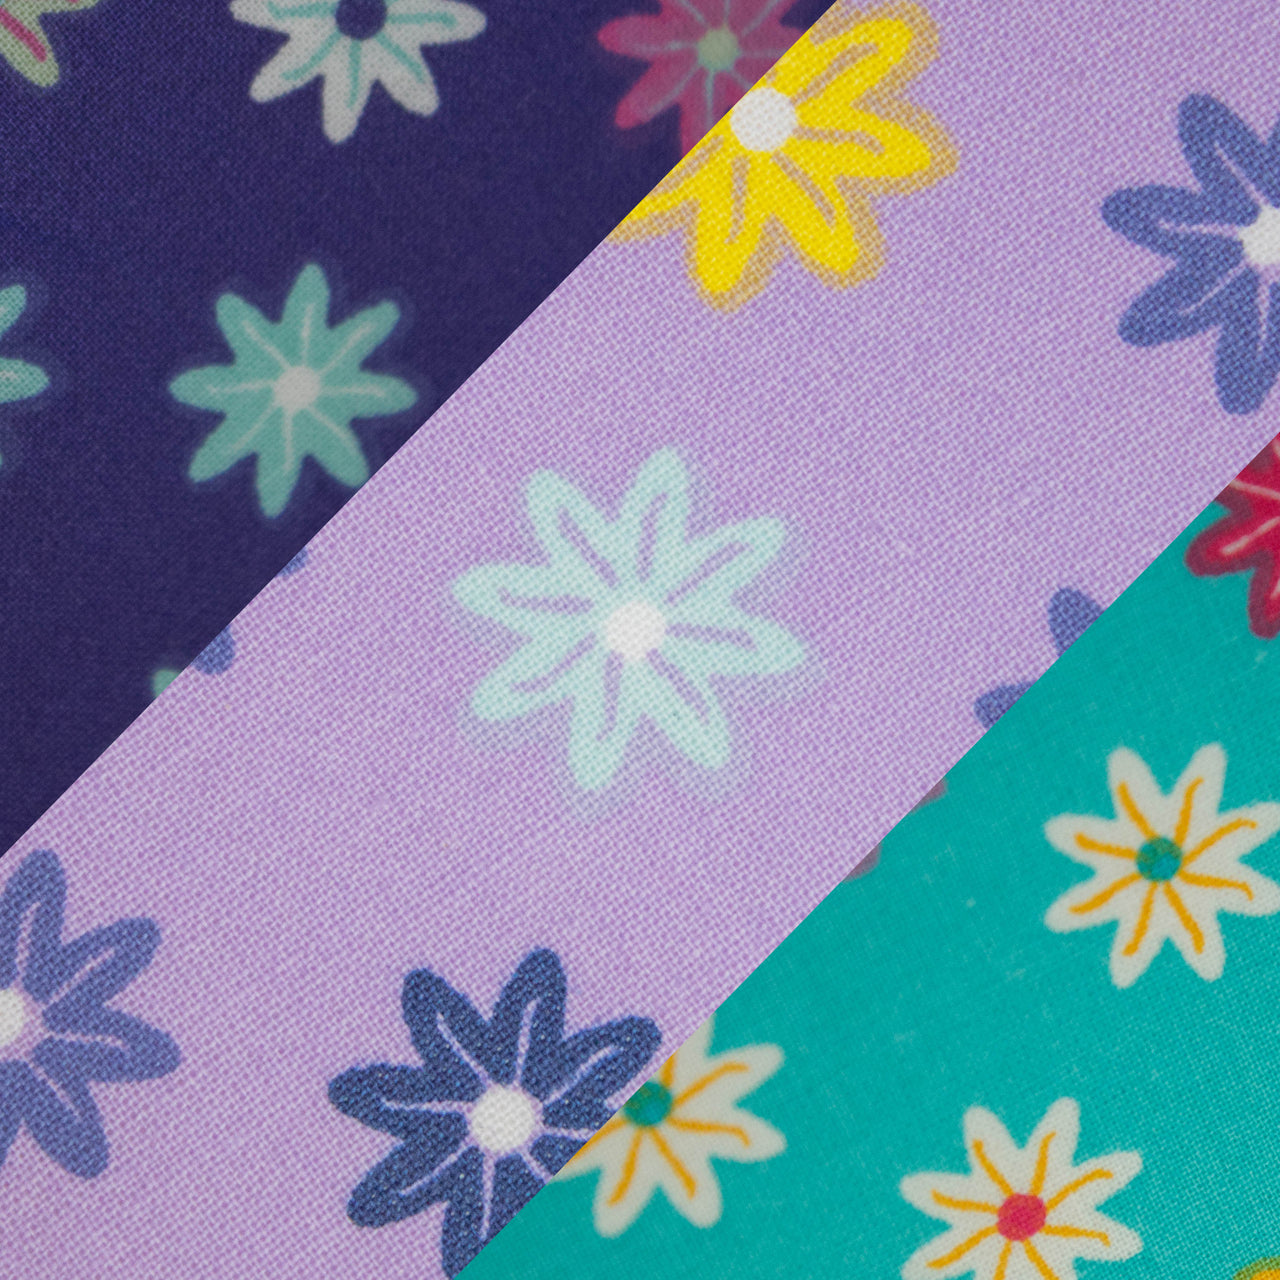 Starburst Flower Design on Printed Cotton Fabric - Available in 3 colourways